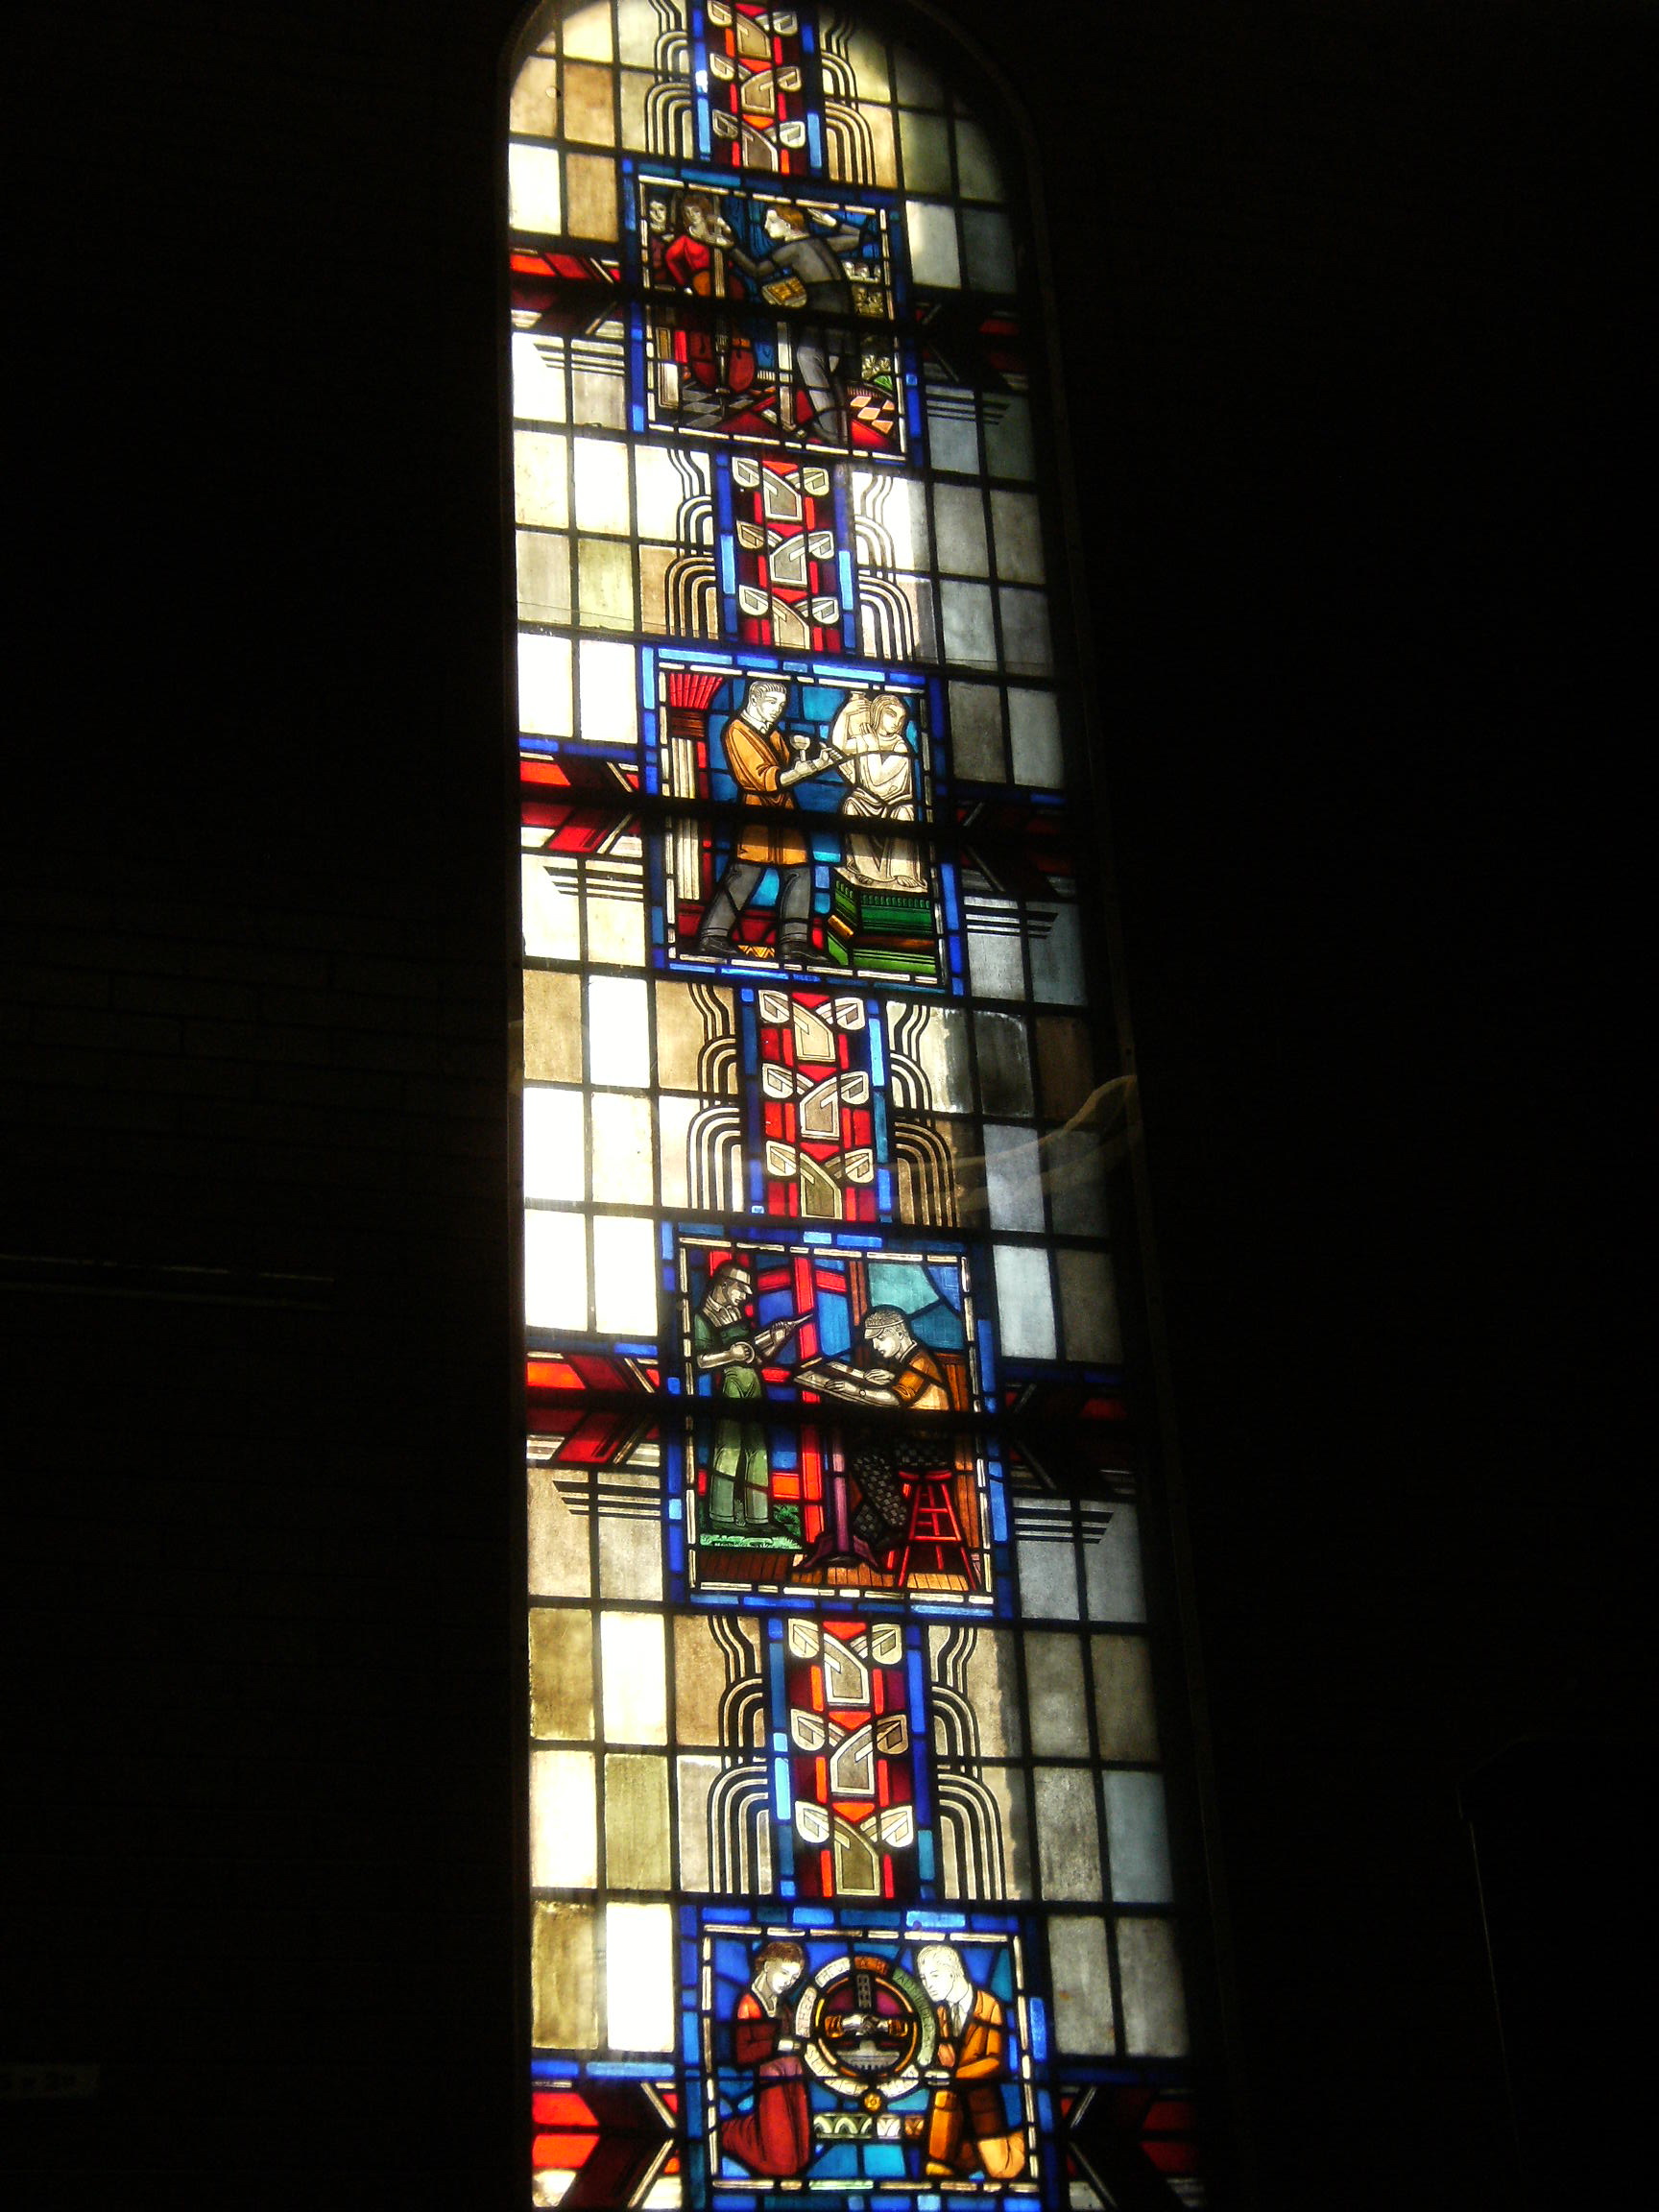 1938 Metcalf Art Deco style stained glass window